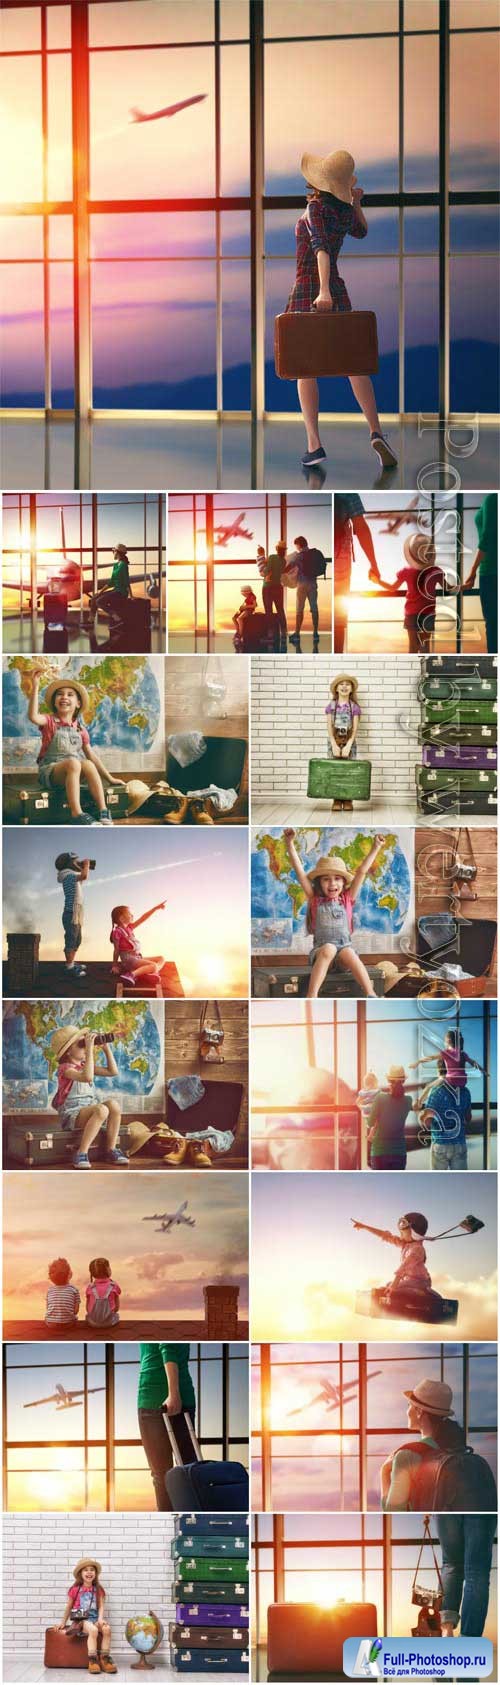 People and travel concept stock photo